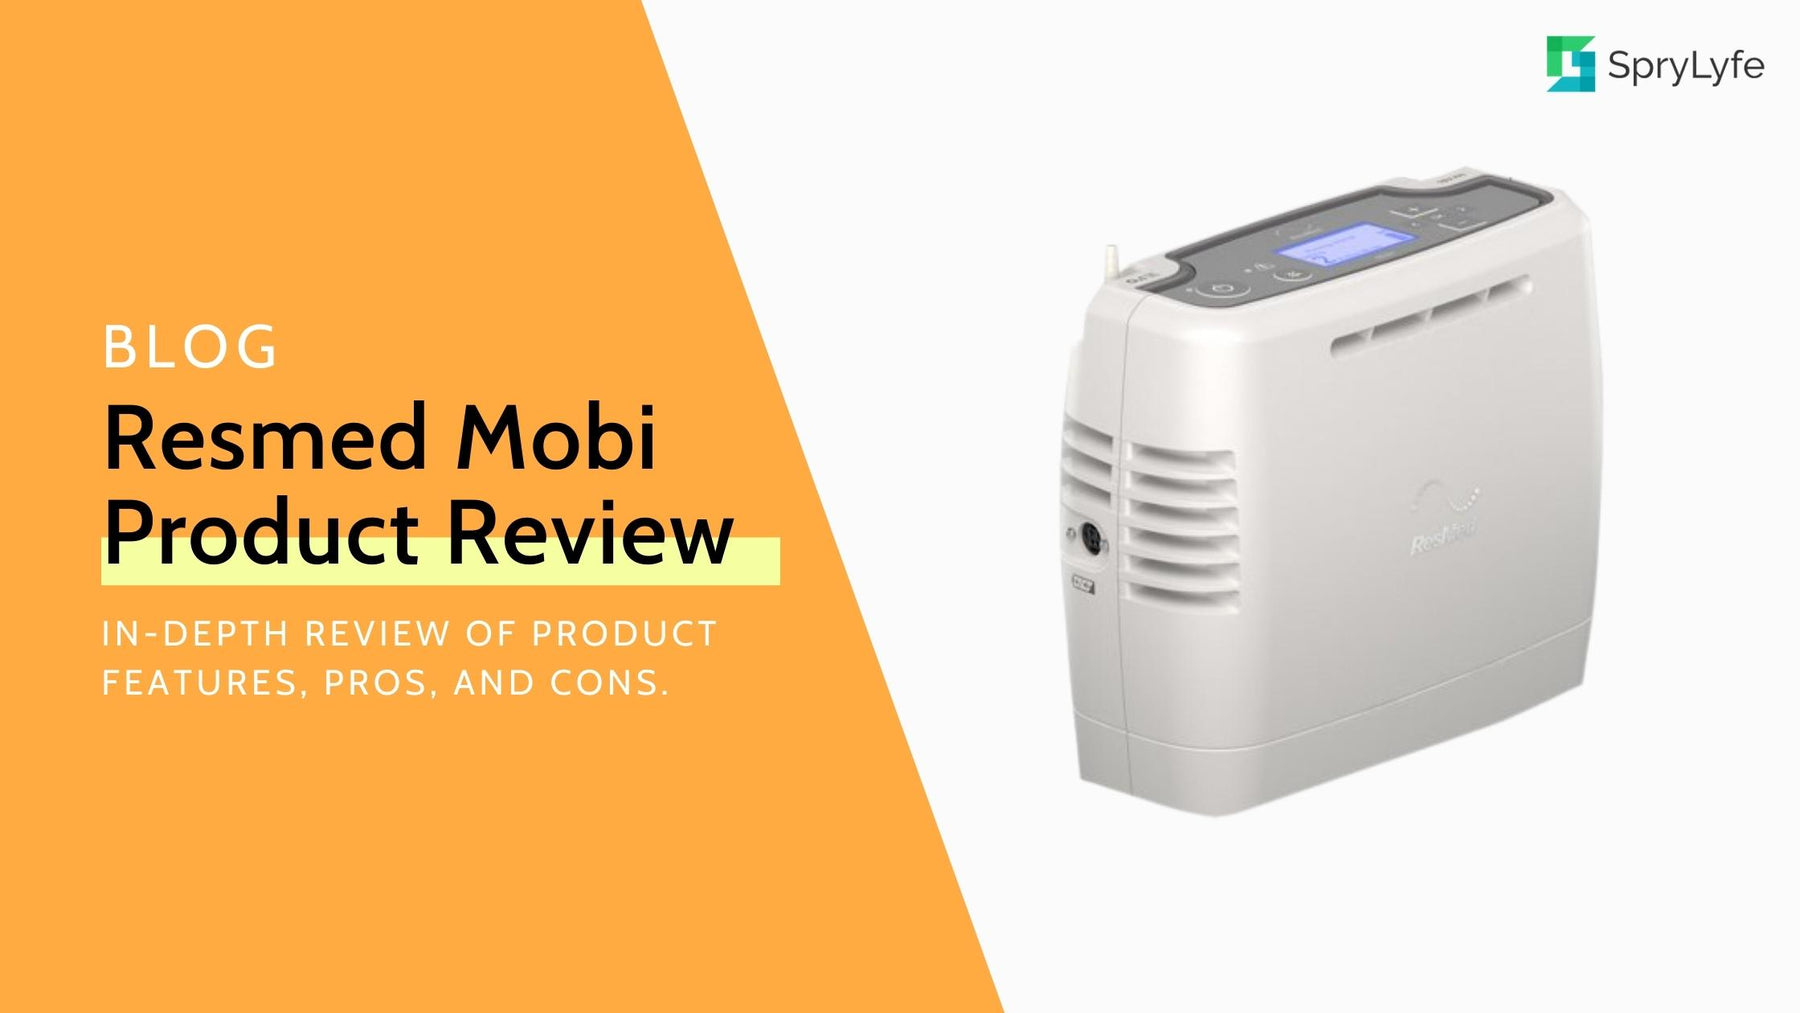 ResMed Mobi Portable Oxygen Concentrator Review